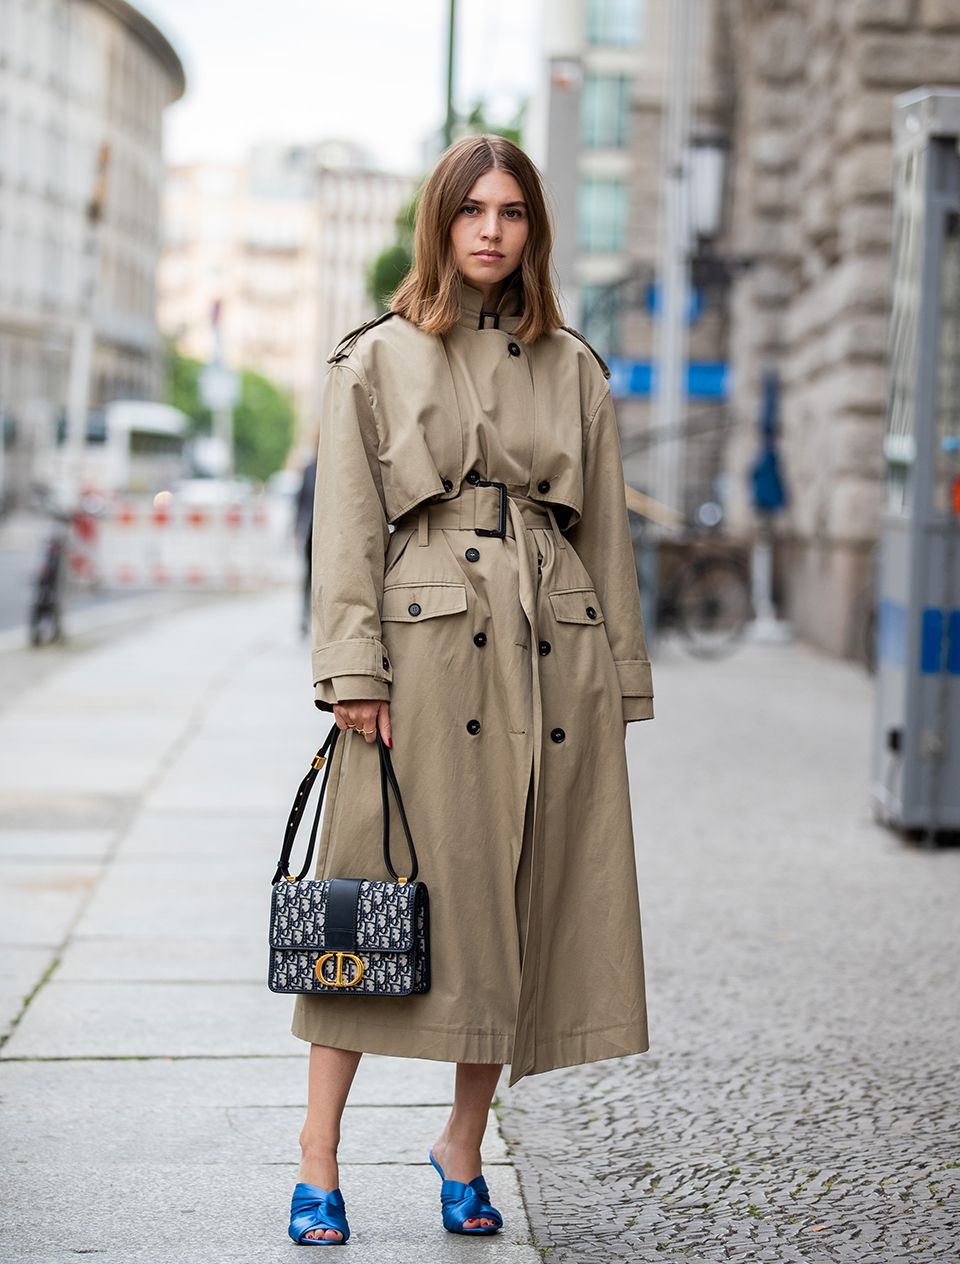 How to style a trench coat: wear it like a dress